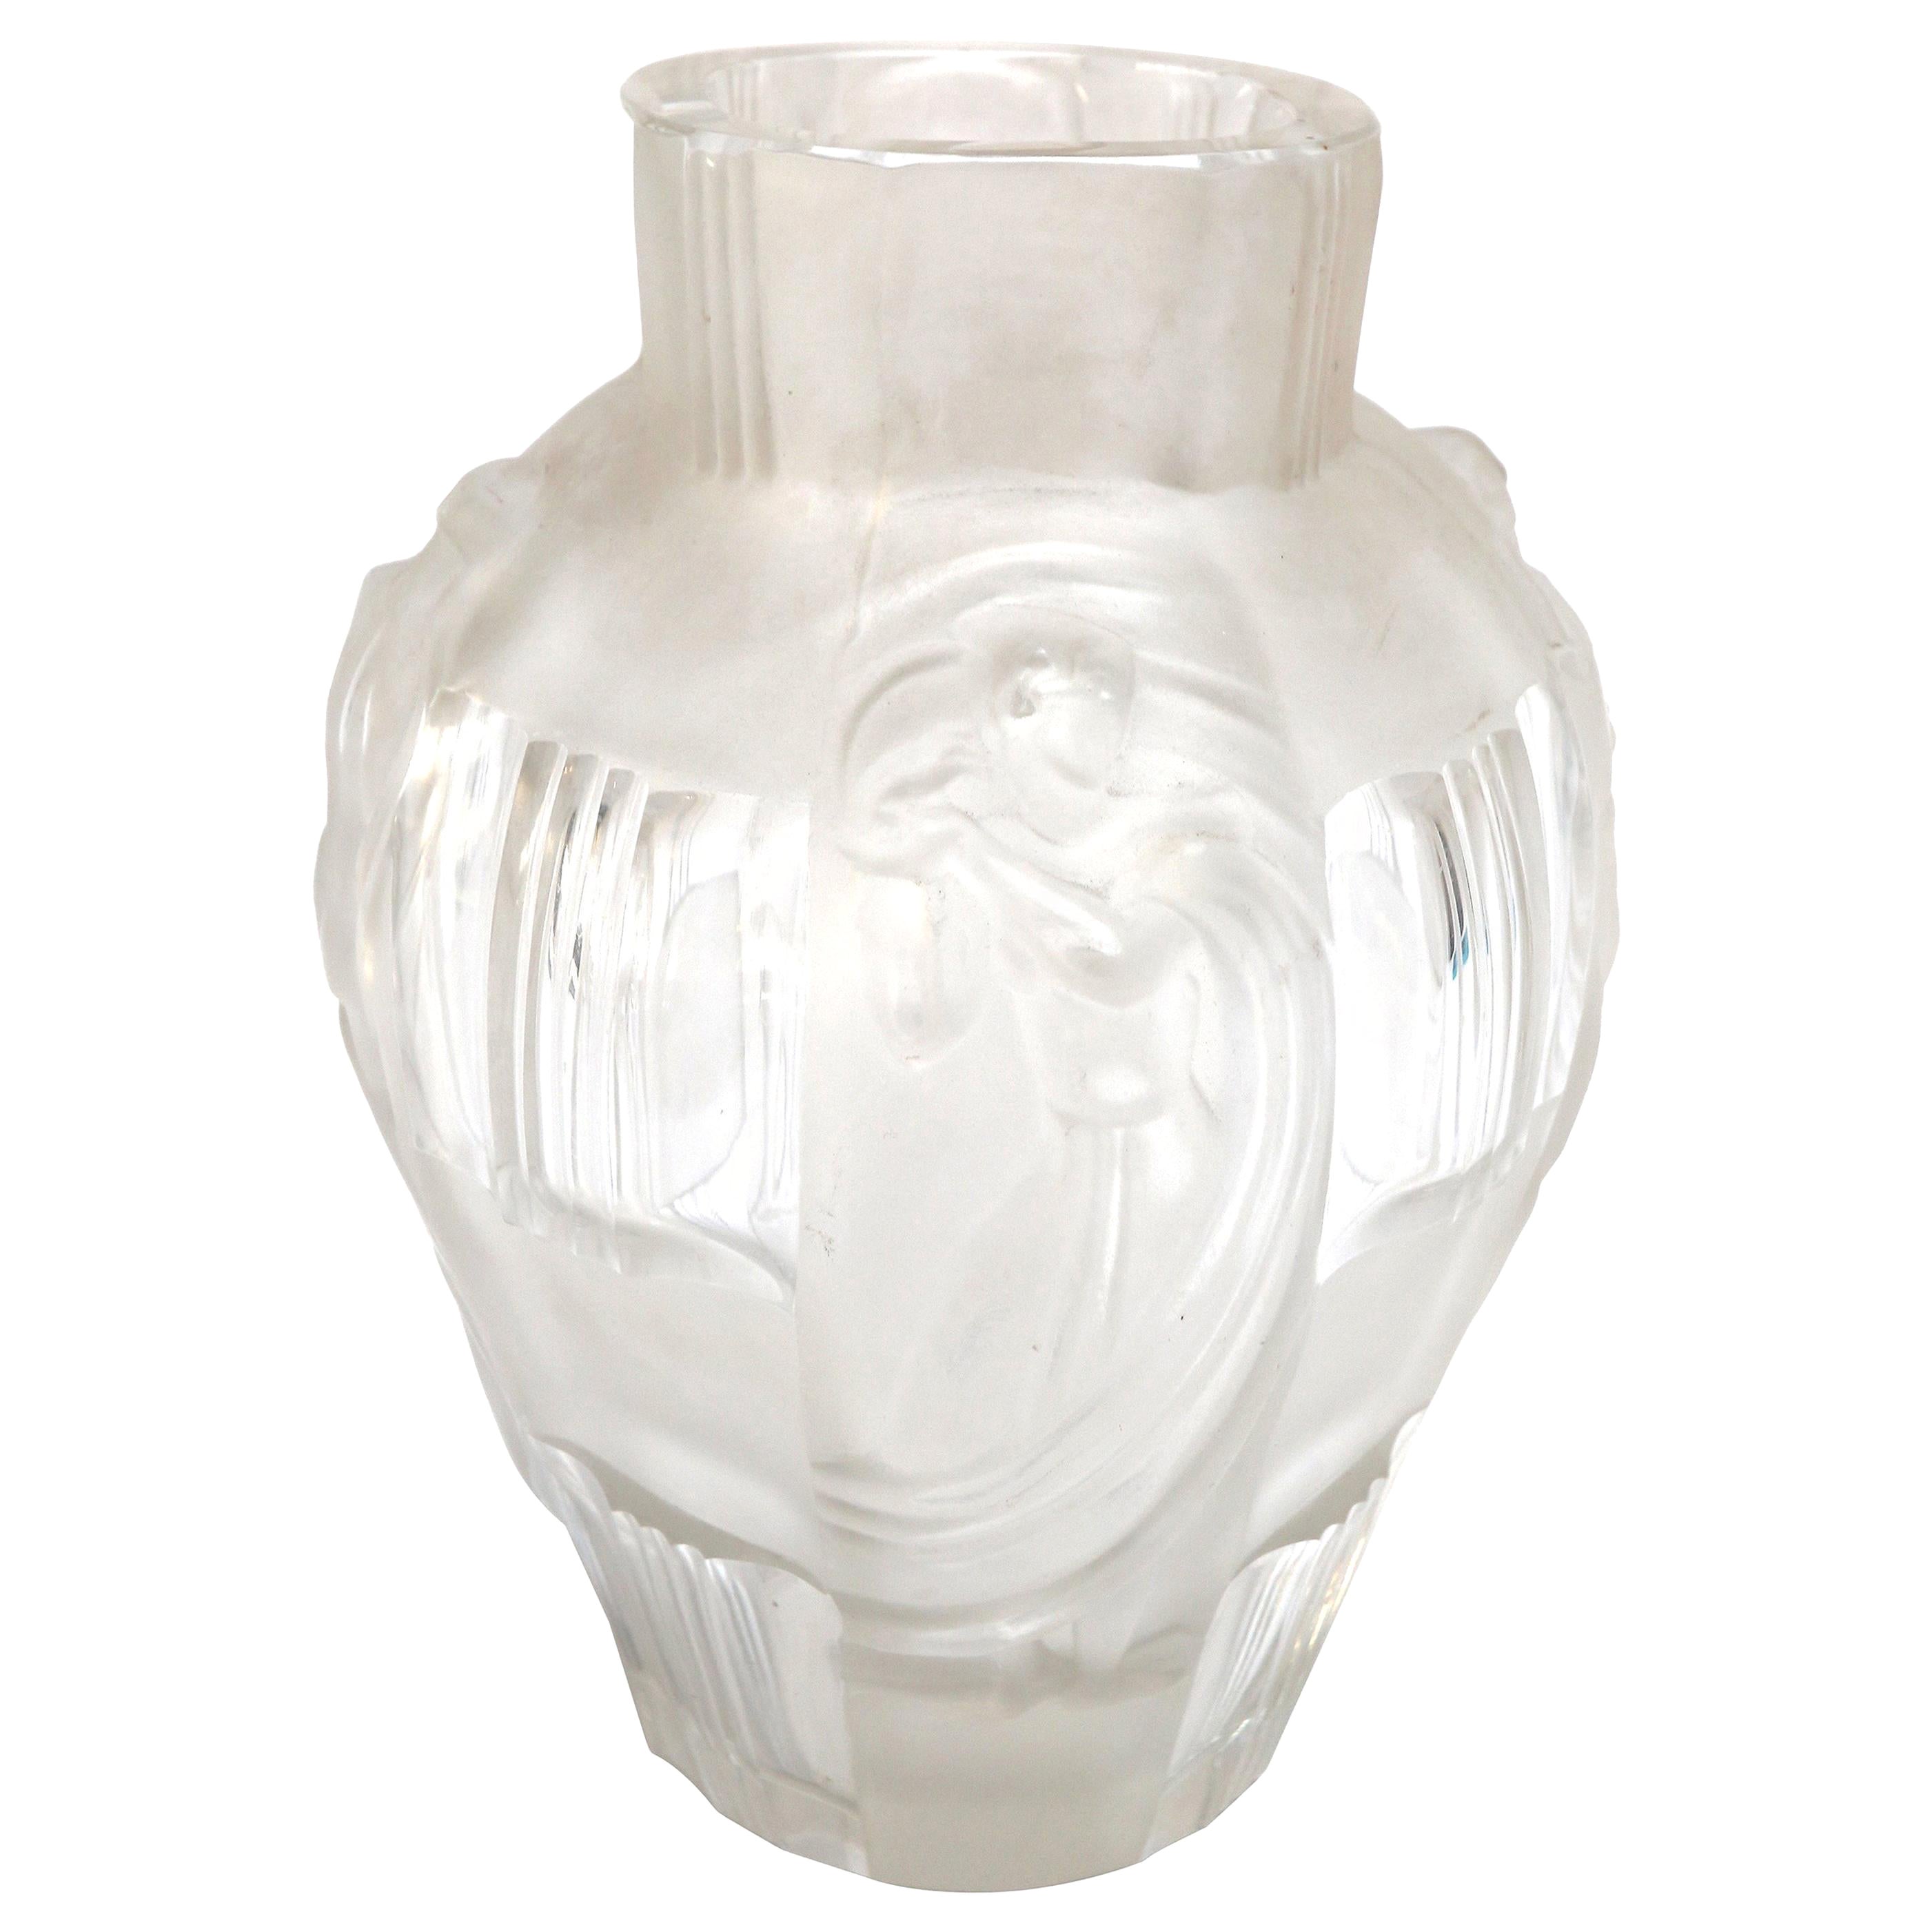 Art Deco Ingrid Glass Vase with Female Figures by Curt Schlevogt, circa 1930s